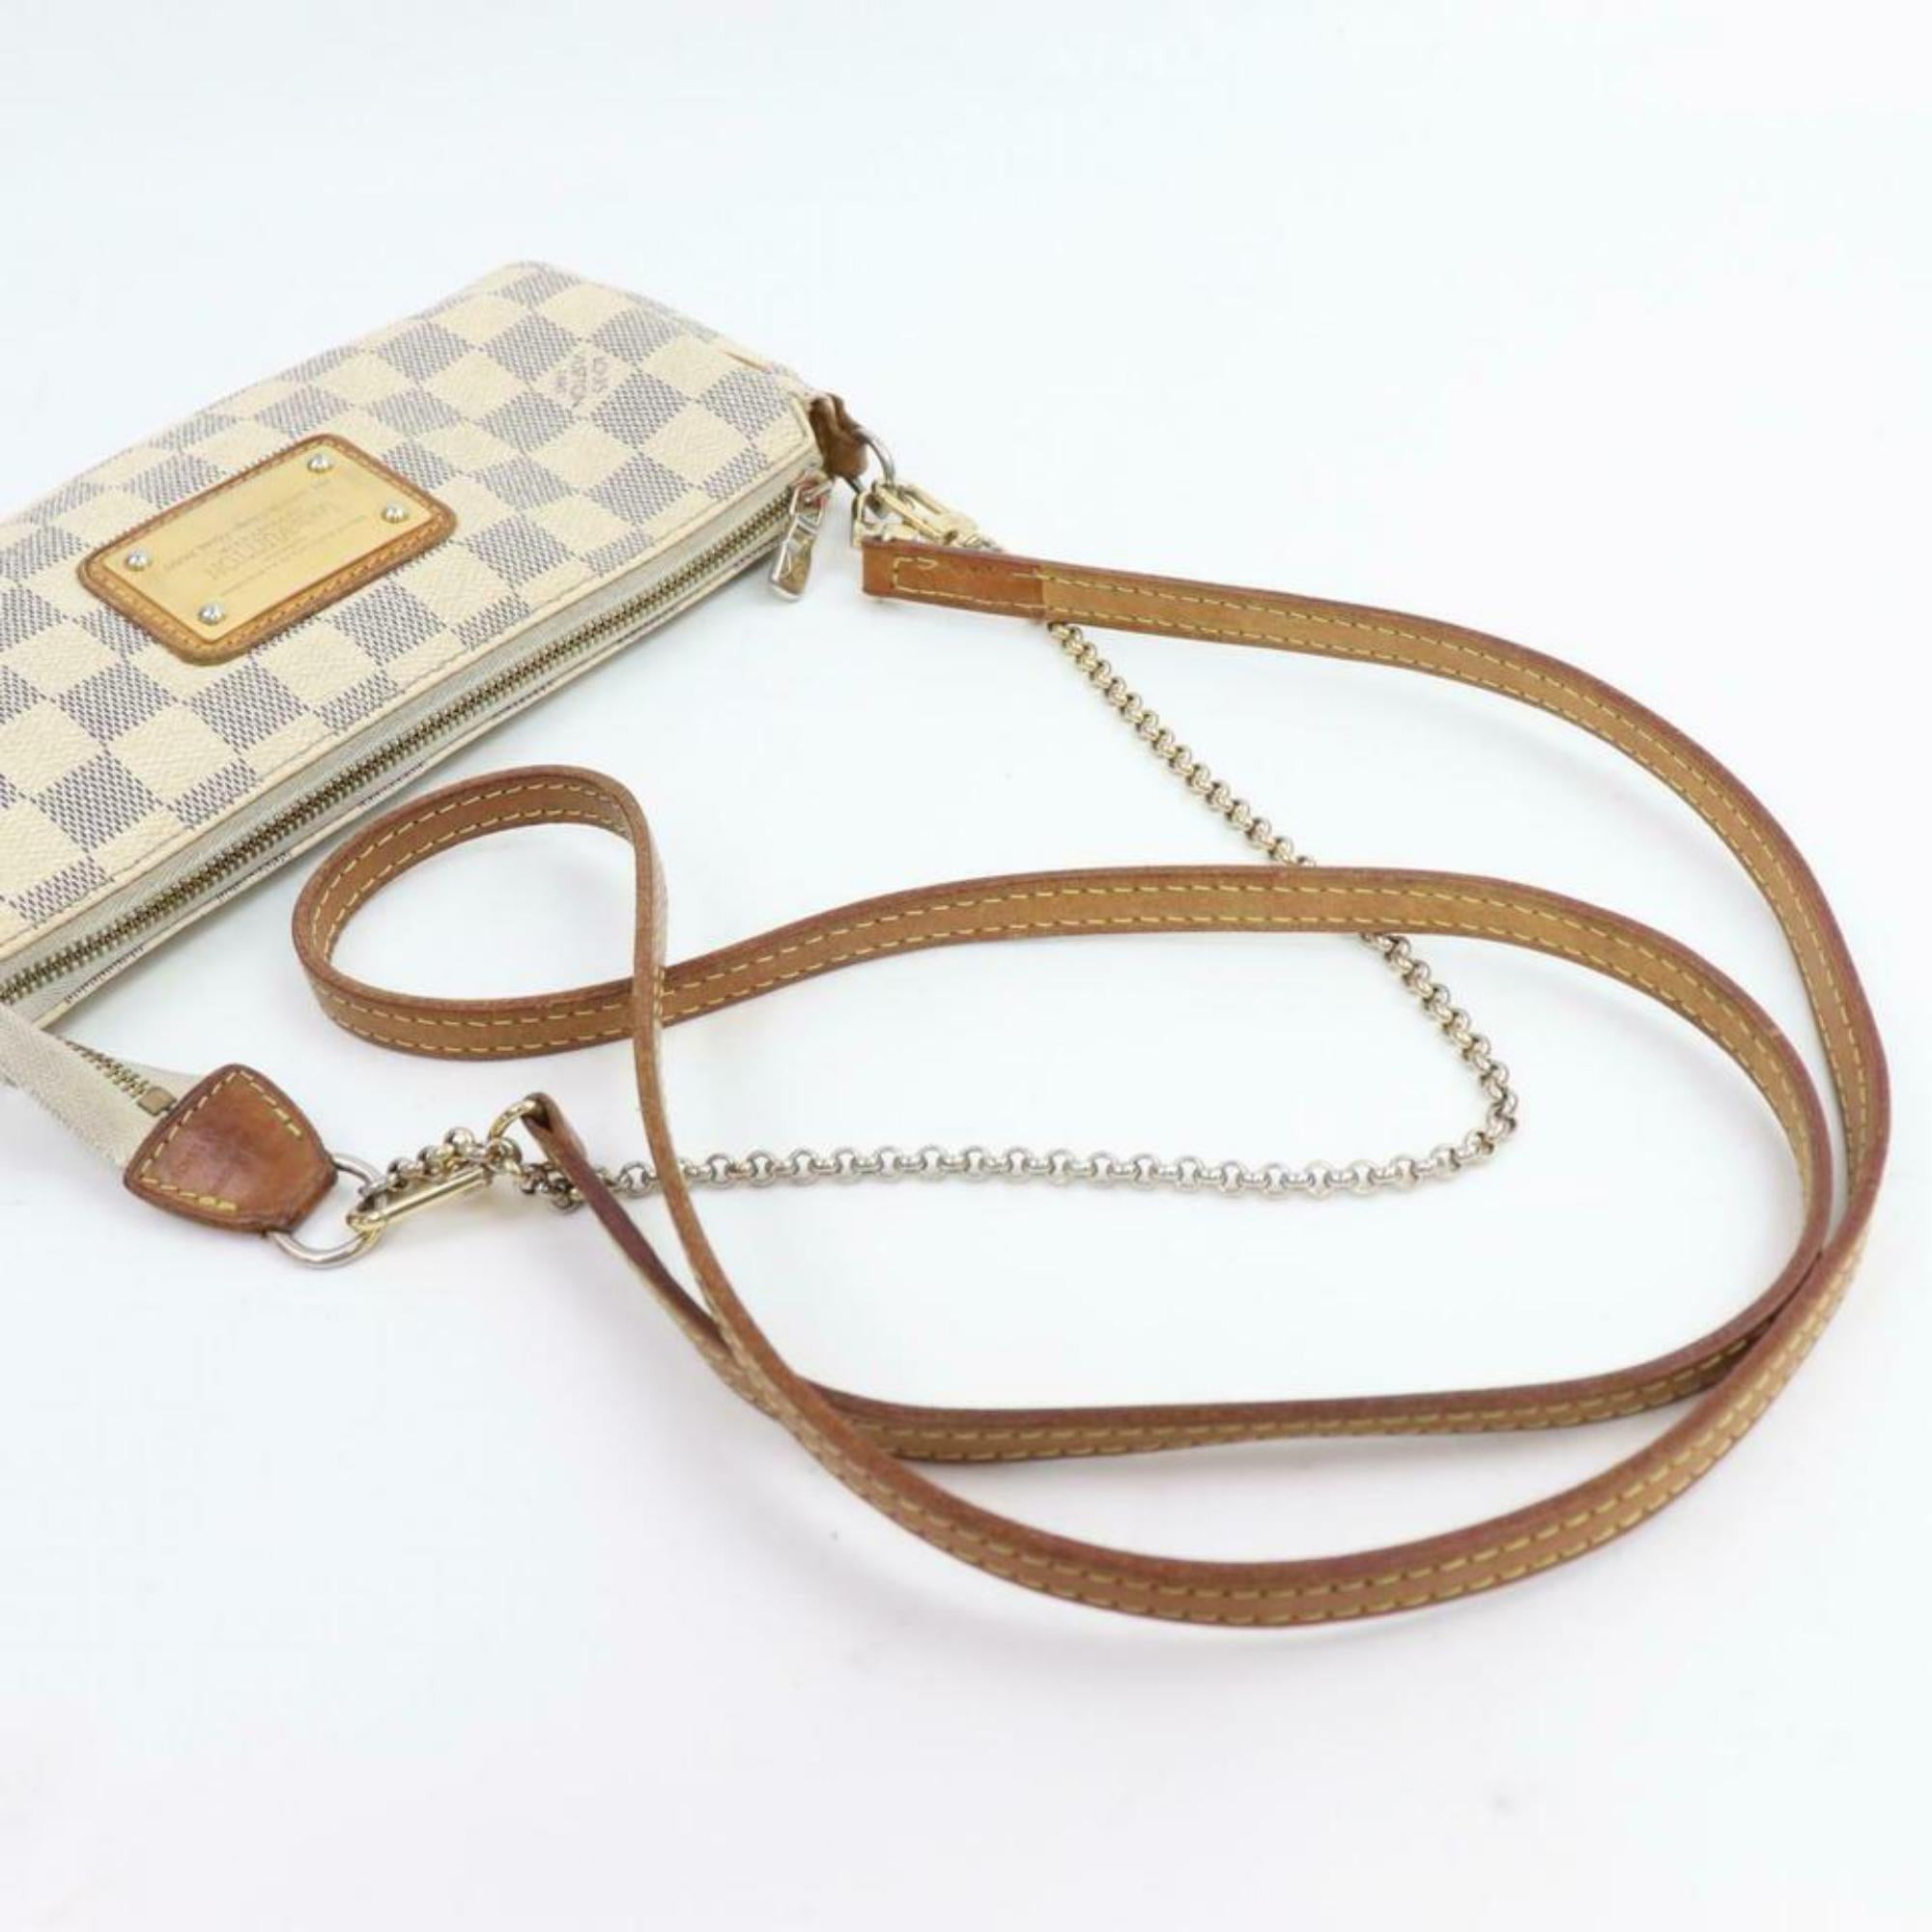 Louis Vuitton Pochette Eva 2way 870642 White Damier Azur Canvas Cross Body Bag In Good Condition For Sale In Forest Hills, NY